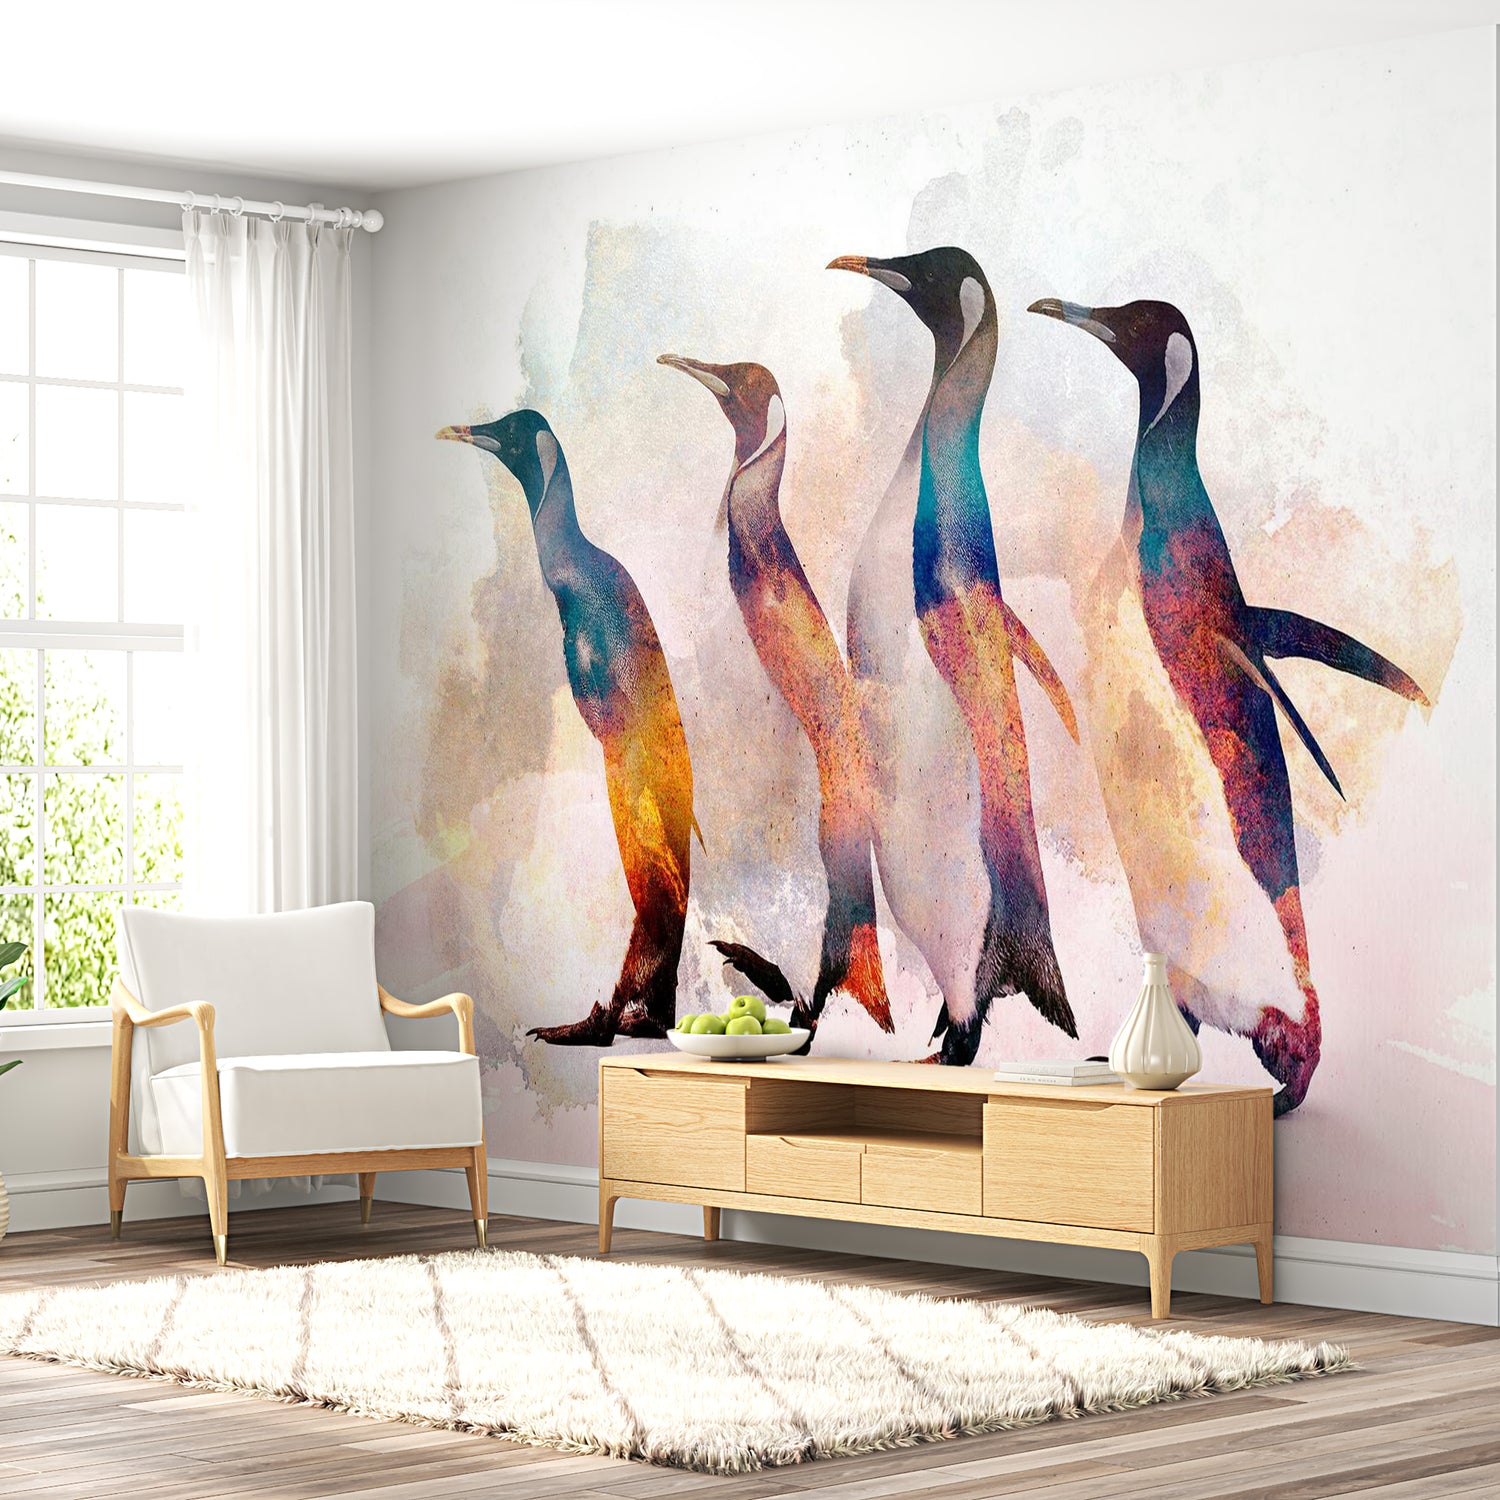 Peel & Stick Animal Wall Mural - Penguins Wandering - Removable Wall Decals